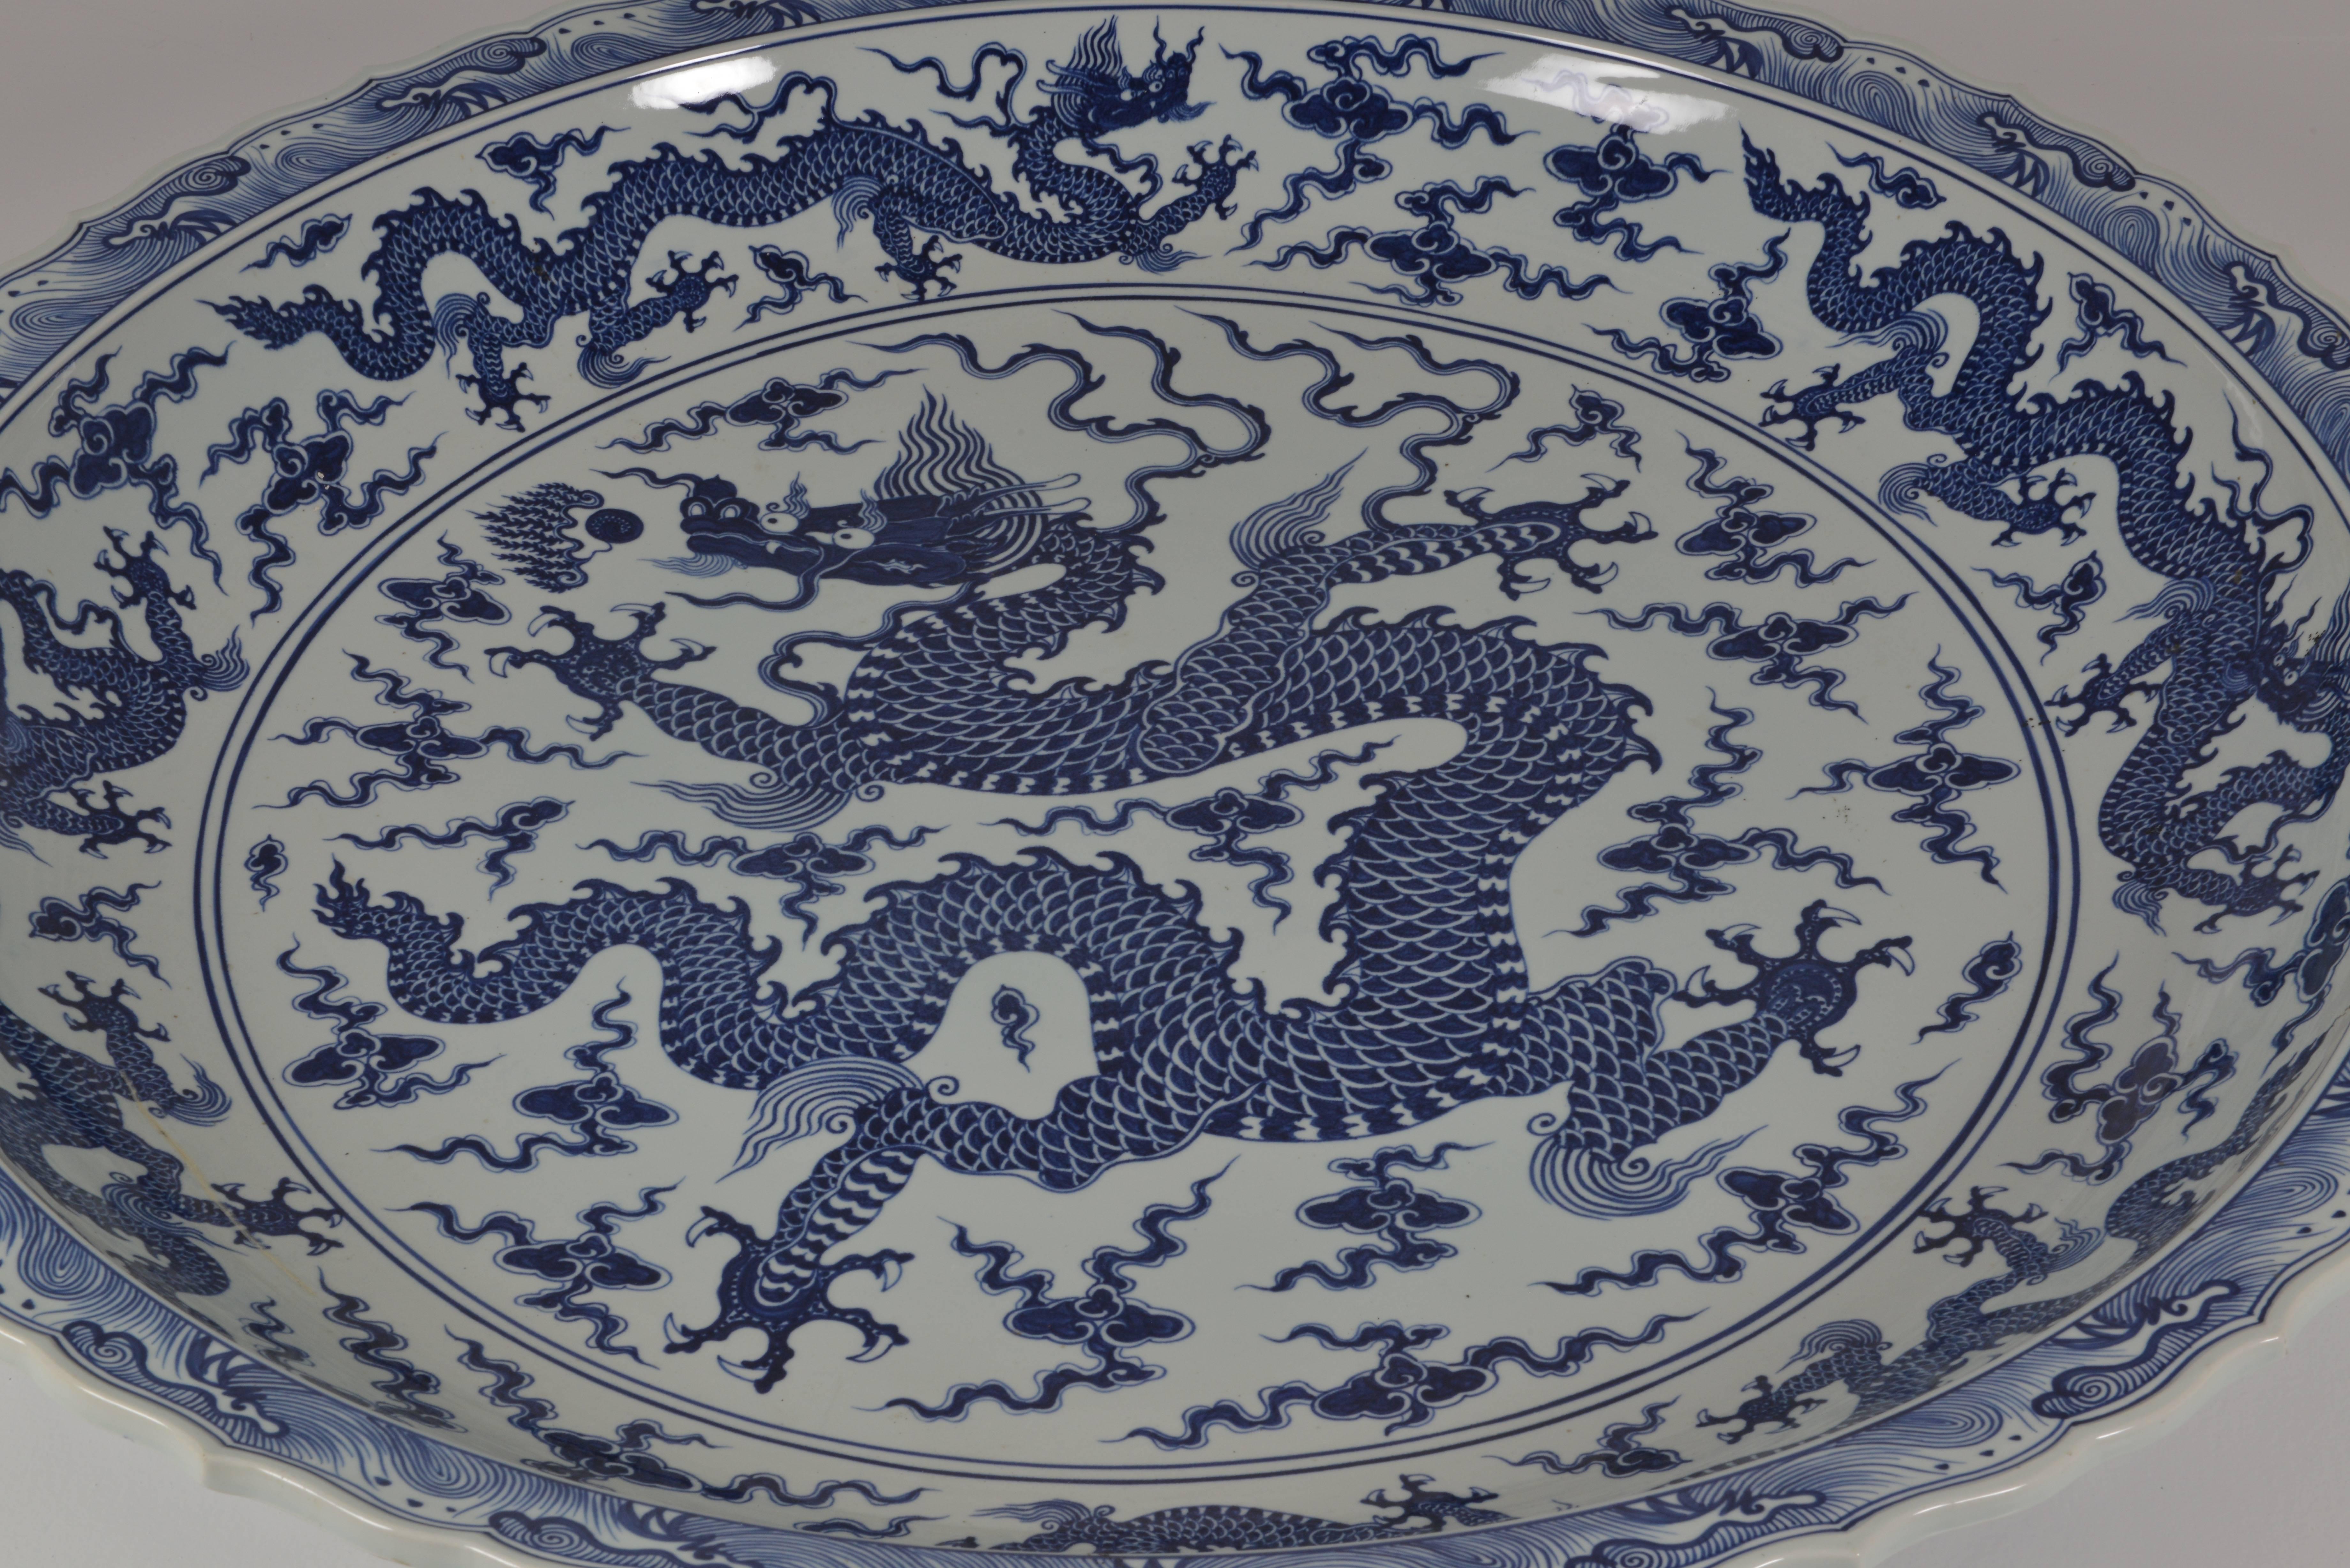 Gigantic Chinese Porcelain Plate 4